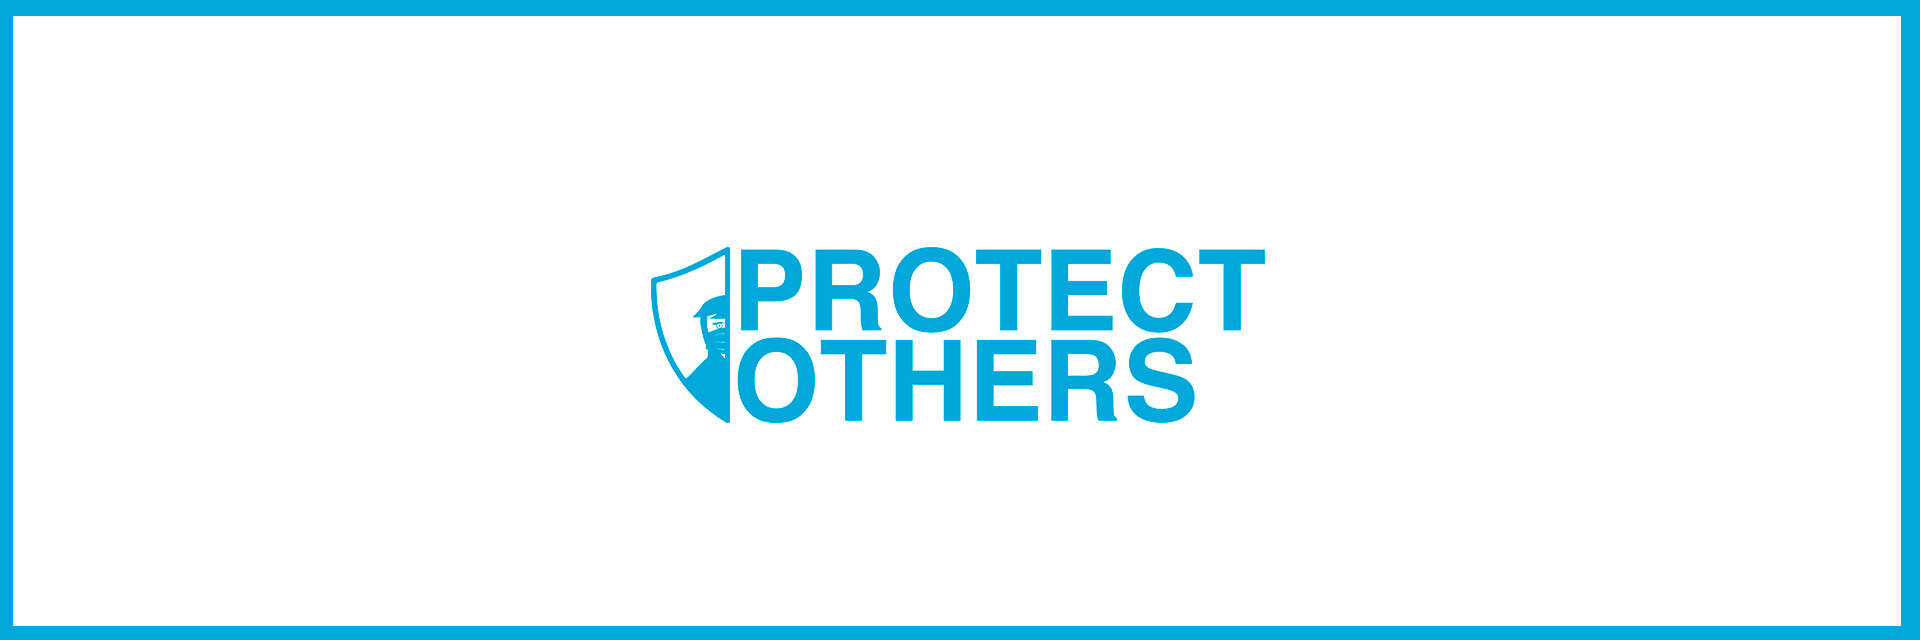 protect others